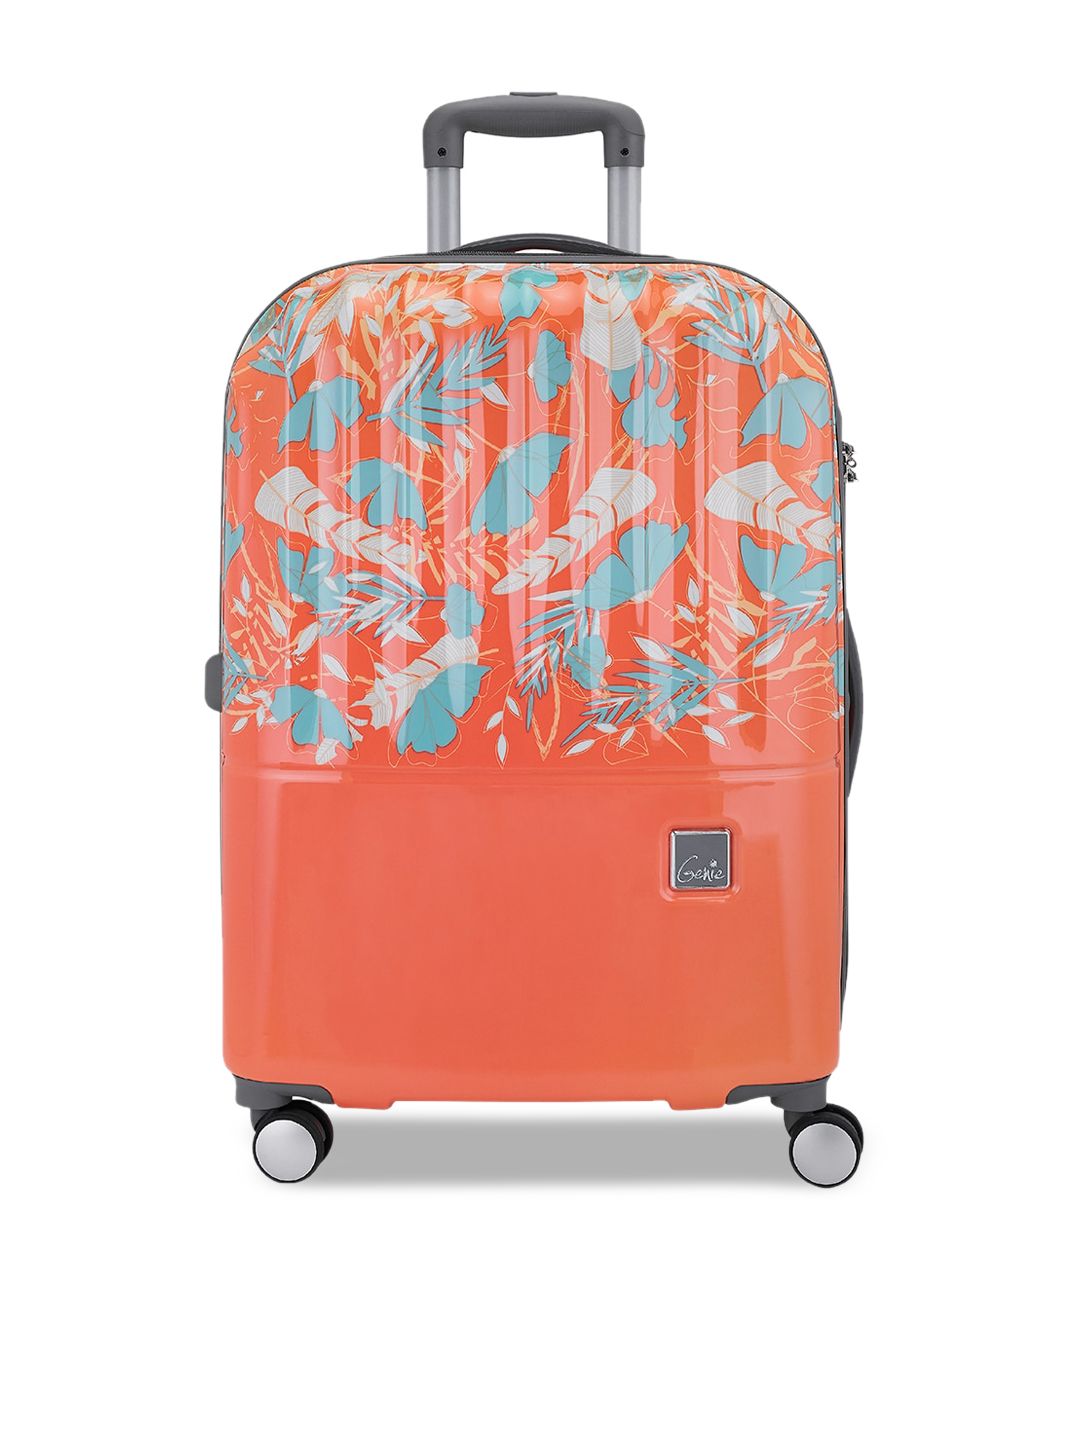 Genie Coral Printed Hard-Sided Luggage Trolley Suitcase Price in India